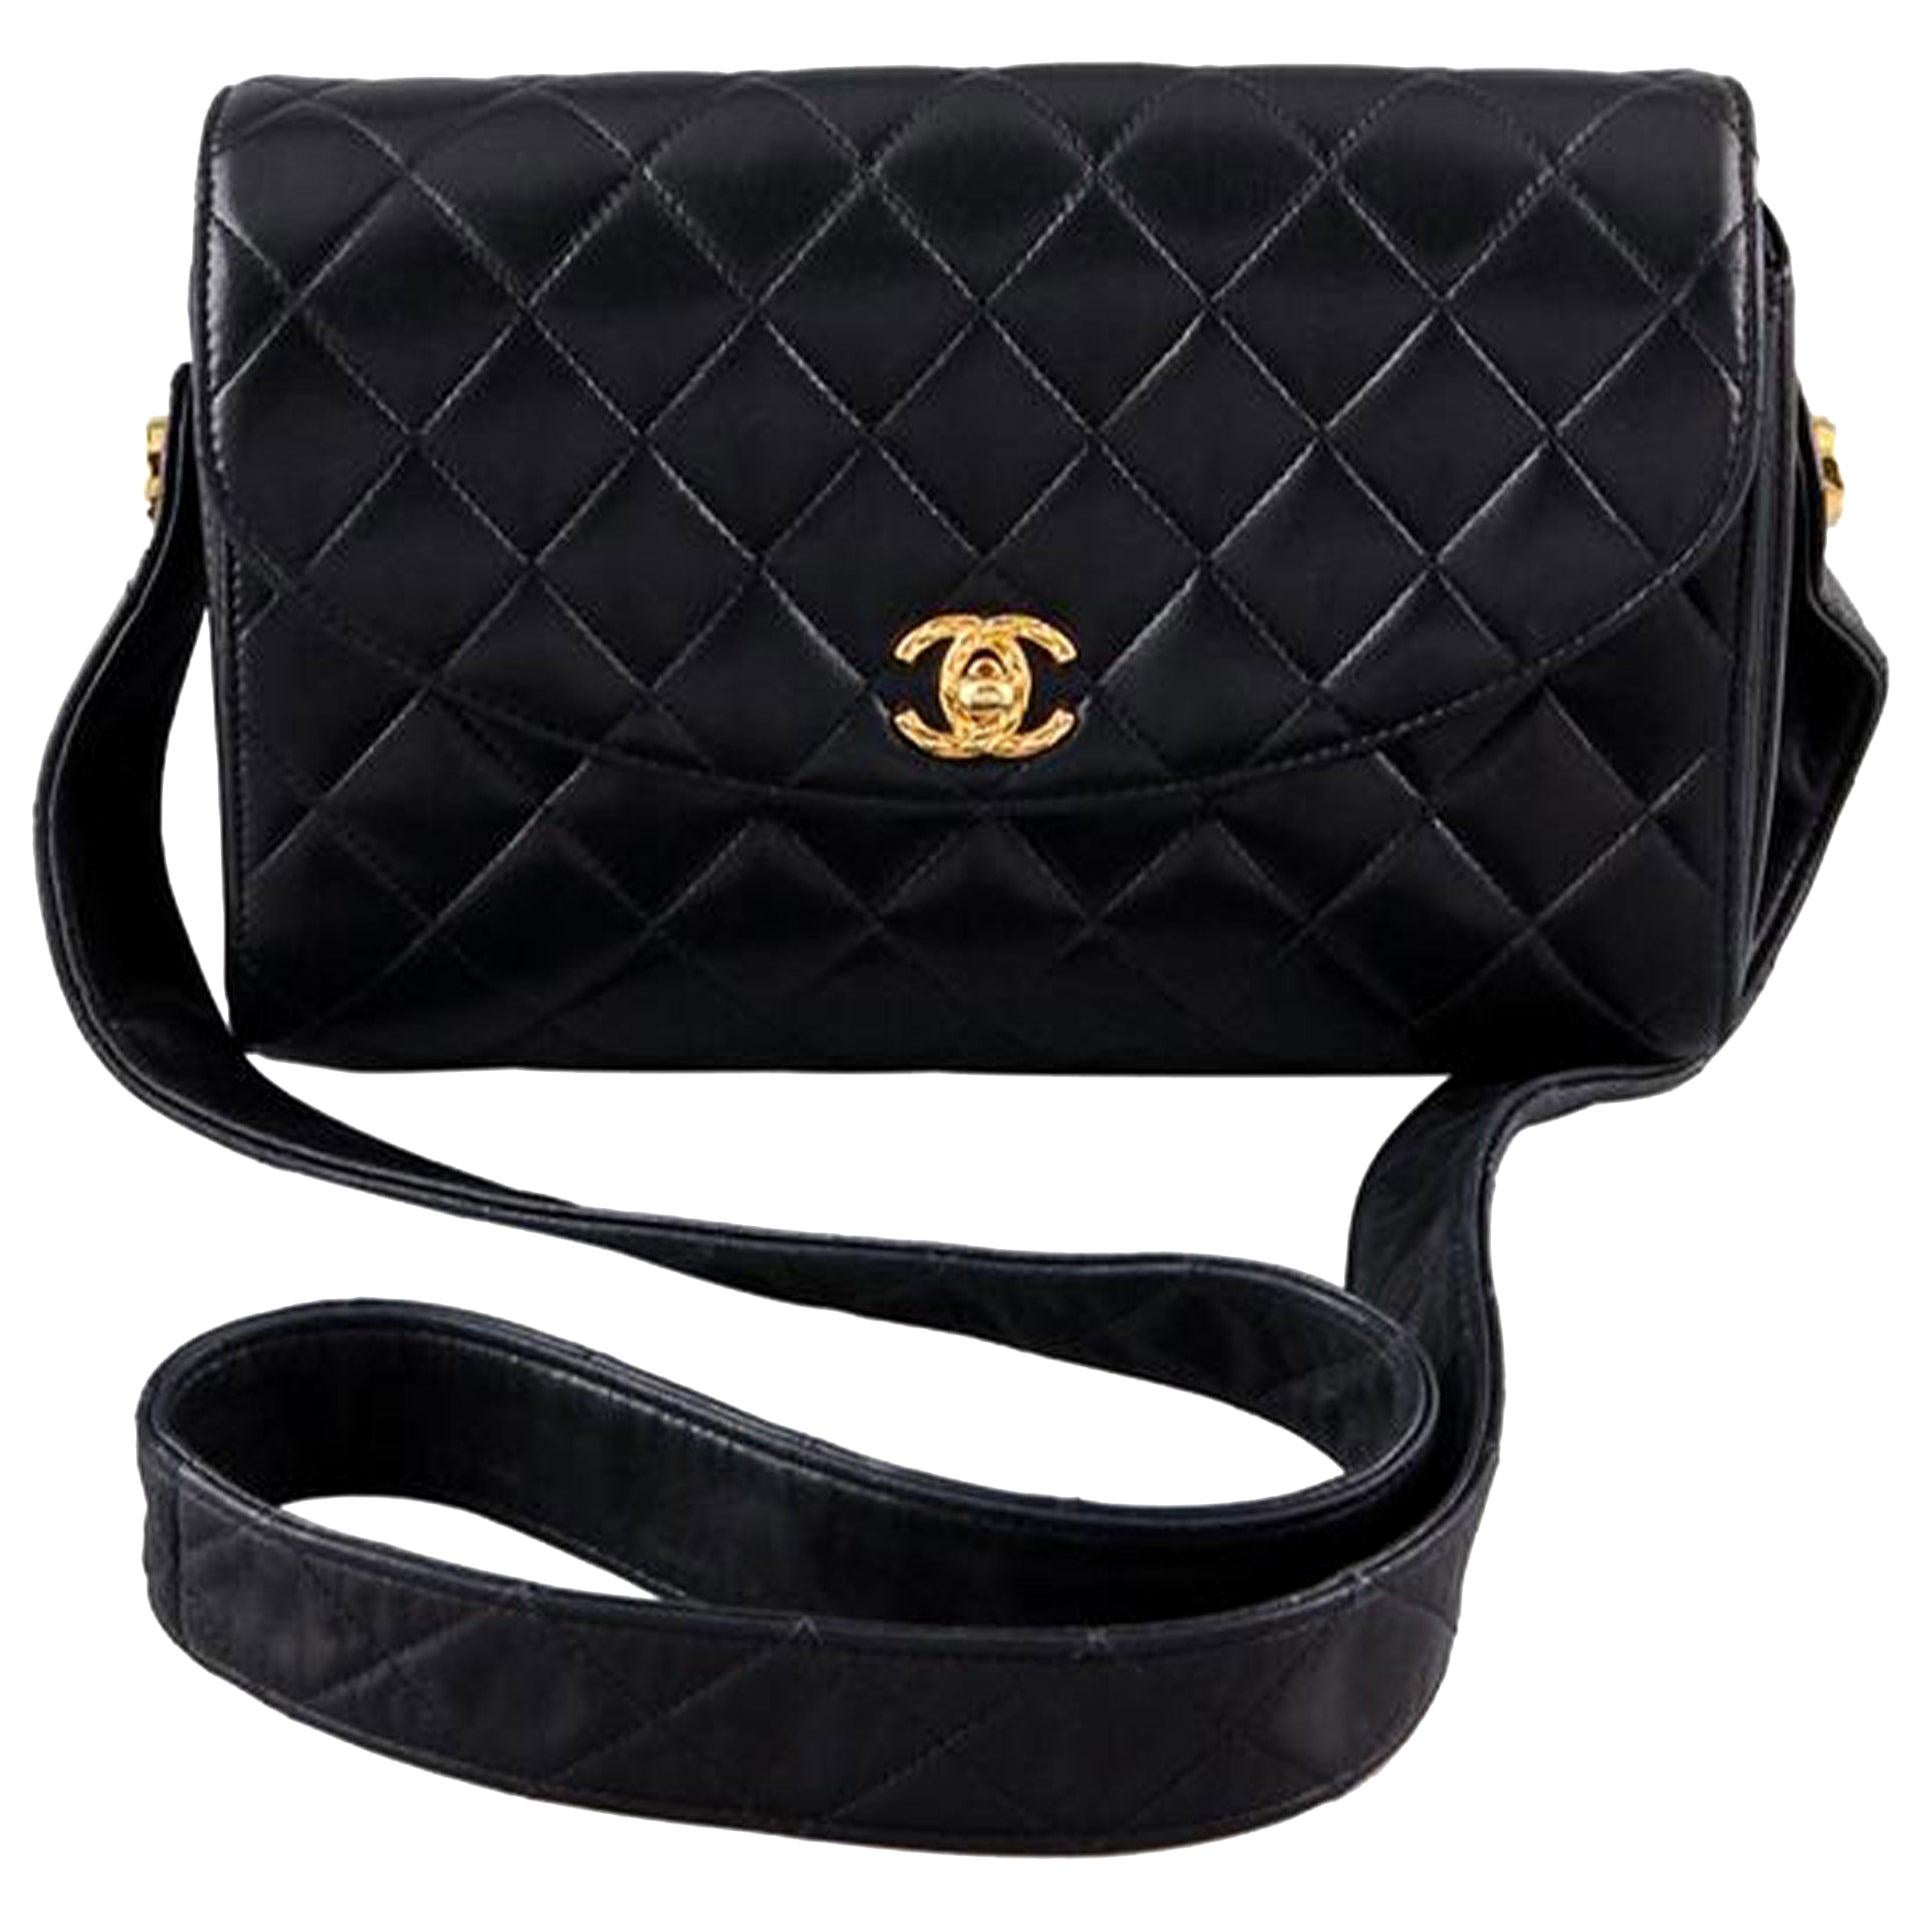 Chanel Vintage Classic Bag Greece SAVE 47  thecocktailcliniccom